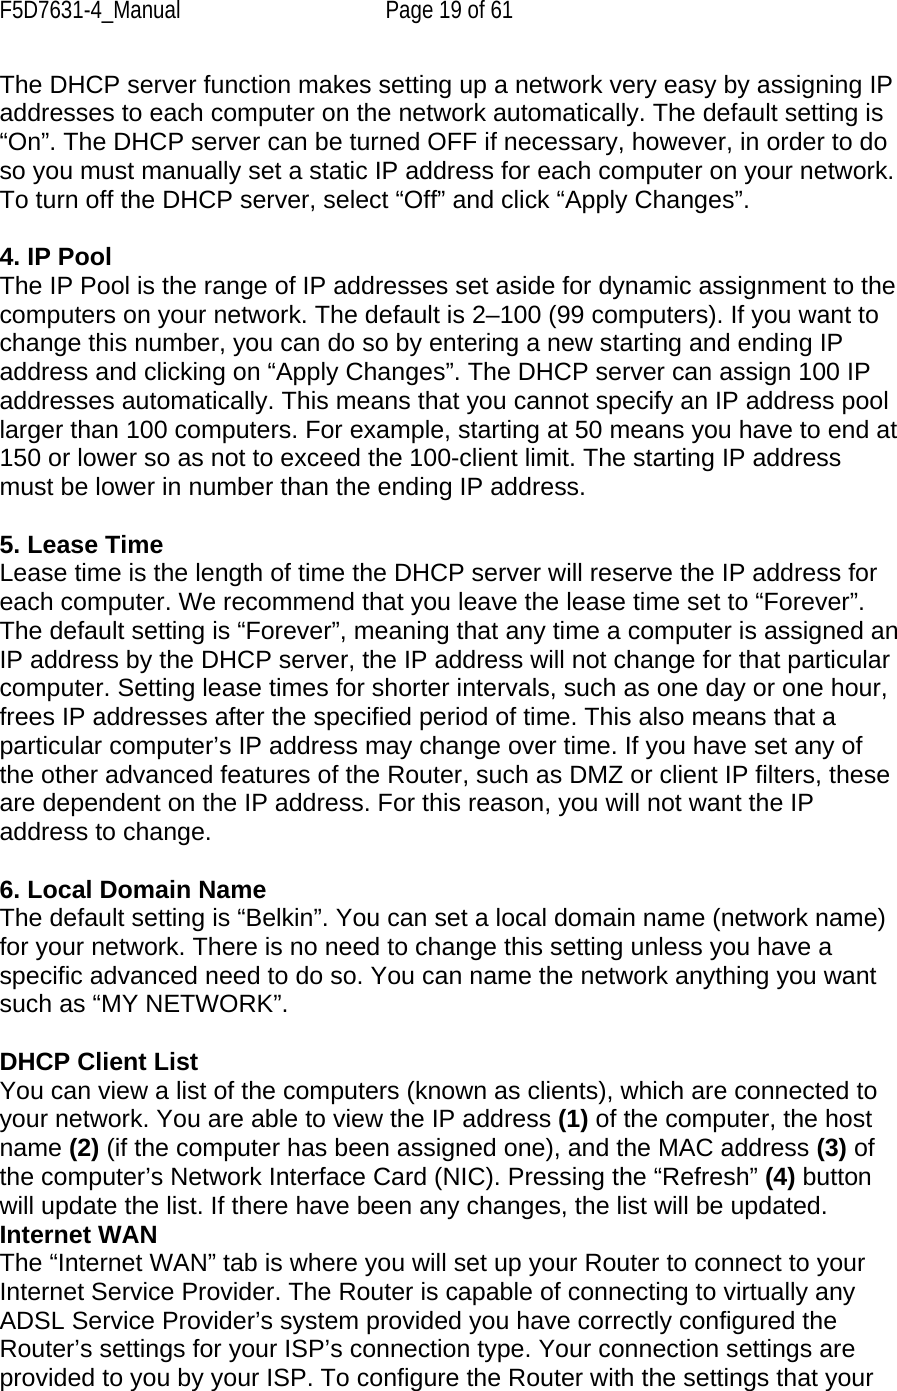 F5D7631-4_Manual  Page 19 of 61 The DHCP server function makes setting up a network very easy by assigning IP addresses to each computer on the network automatically. The default setting is “On”. The DHCP server can be turned OFF if necessary, however, in order to do so you must manually set a static IP address for each computer on your network. To turn off the DHCP server, select “Off” and click “Apply Changes”.  4. IP Pool The IP Pool is the range of IP addresses set aside for dynamic assignment to the computers on your network. The default is 2–100 (99 computers). If you want to change this number, you can do so by entering a new starting and ending IP address and clicking on “Apply Changes”. The DHCP server can assign 100 IP addresses automatically. This means that you cannot specify an IP address pool larger than 100 computers. For example, starting at 50 means you have to end at 150 or lower so as not to exceed the 100-client limit. The starting IP address must be lower in number than the ending IP address.  5. Lease Time Lease time is the length of time the DHCP server will reserve the IP address for each computer. We recommend that you leave the lease time set to “Forever”. The default setting is “Forever”, meaning that any time a computer is assigned an IP address by the DHCP server, the IP address will not change for that particular computer. Setting lease times for shorter intervals, such as one day or one hour, frees IP addresses after the specified period of time. This also means that a particular computer’s IP address may change over time. If you have set any of the other advanced features of the Router, such as DMZ or client IP filters, these are dependent on the IP address. For this reason, you will not want the IP address to change.  6. Local Domain Name The default setting is “Belkin”. You can set a local domain name (network name) for your network. There is no need to change this setting unless you have a specific advanced need to do so. You can name the network anything you want such as “MY NETWORK”.  DHCP Client List You can view a list of the computers (known as clients), which are connected to your network. You are able to view the IP address (1) of the computer, the host name (2) (if the computer has been assigned one), and the MAC address (3) of the computer’s Network Interface Card (NIC). Pressing the “Refresh” (4) button will update the list. If there have been any changes, the list will be updated. Internet WAN The “Internet WAN” tab is where you will set up your Router to connect to your Internet Service Provider. The Router is capable of connecting to virtually any ADSL Service Provider’s system provided you have correctly configured the Router’s settings for your ISP’s connection type. Your connection settings are provided to you by your ISP. To configure the Router with the settings that your 